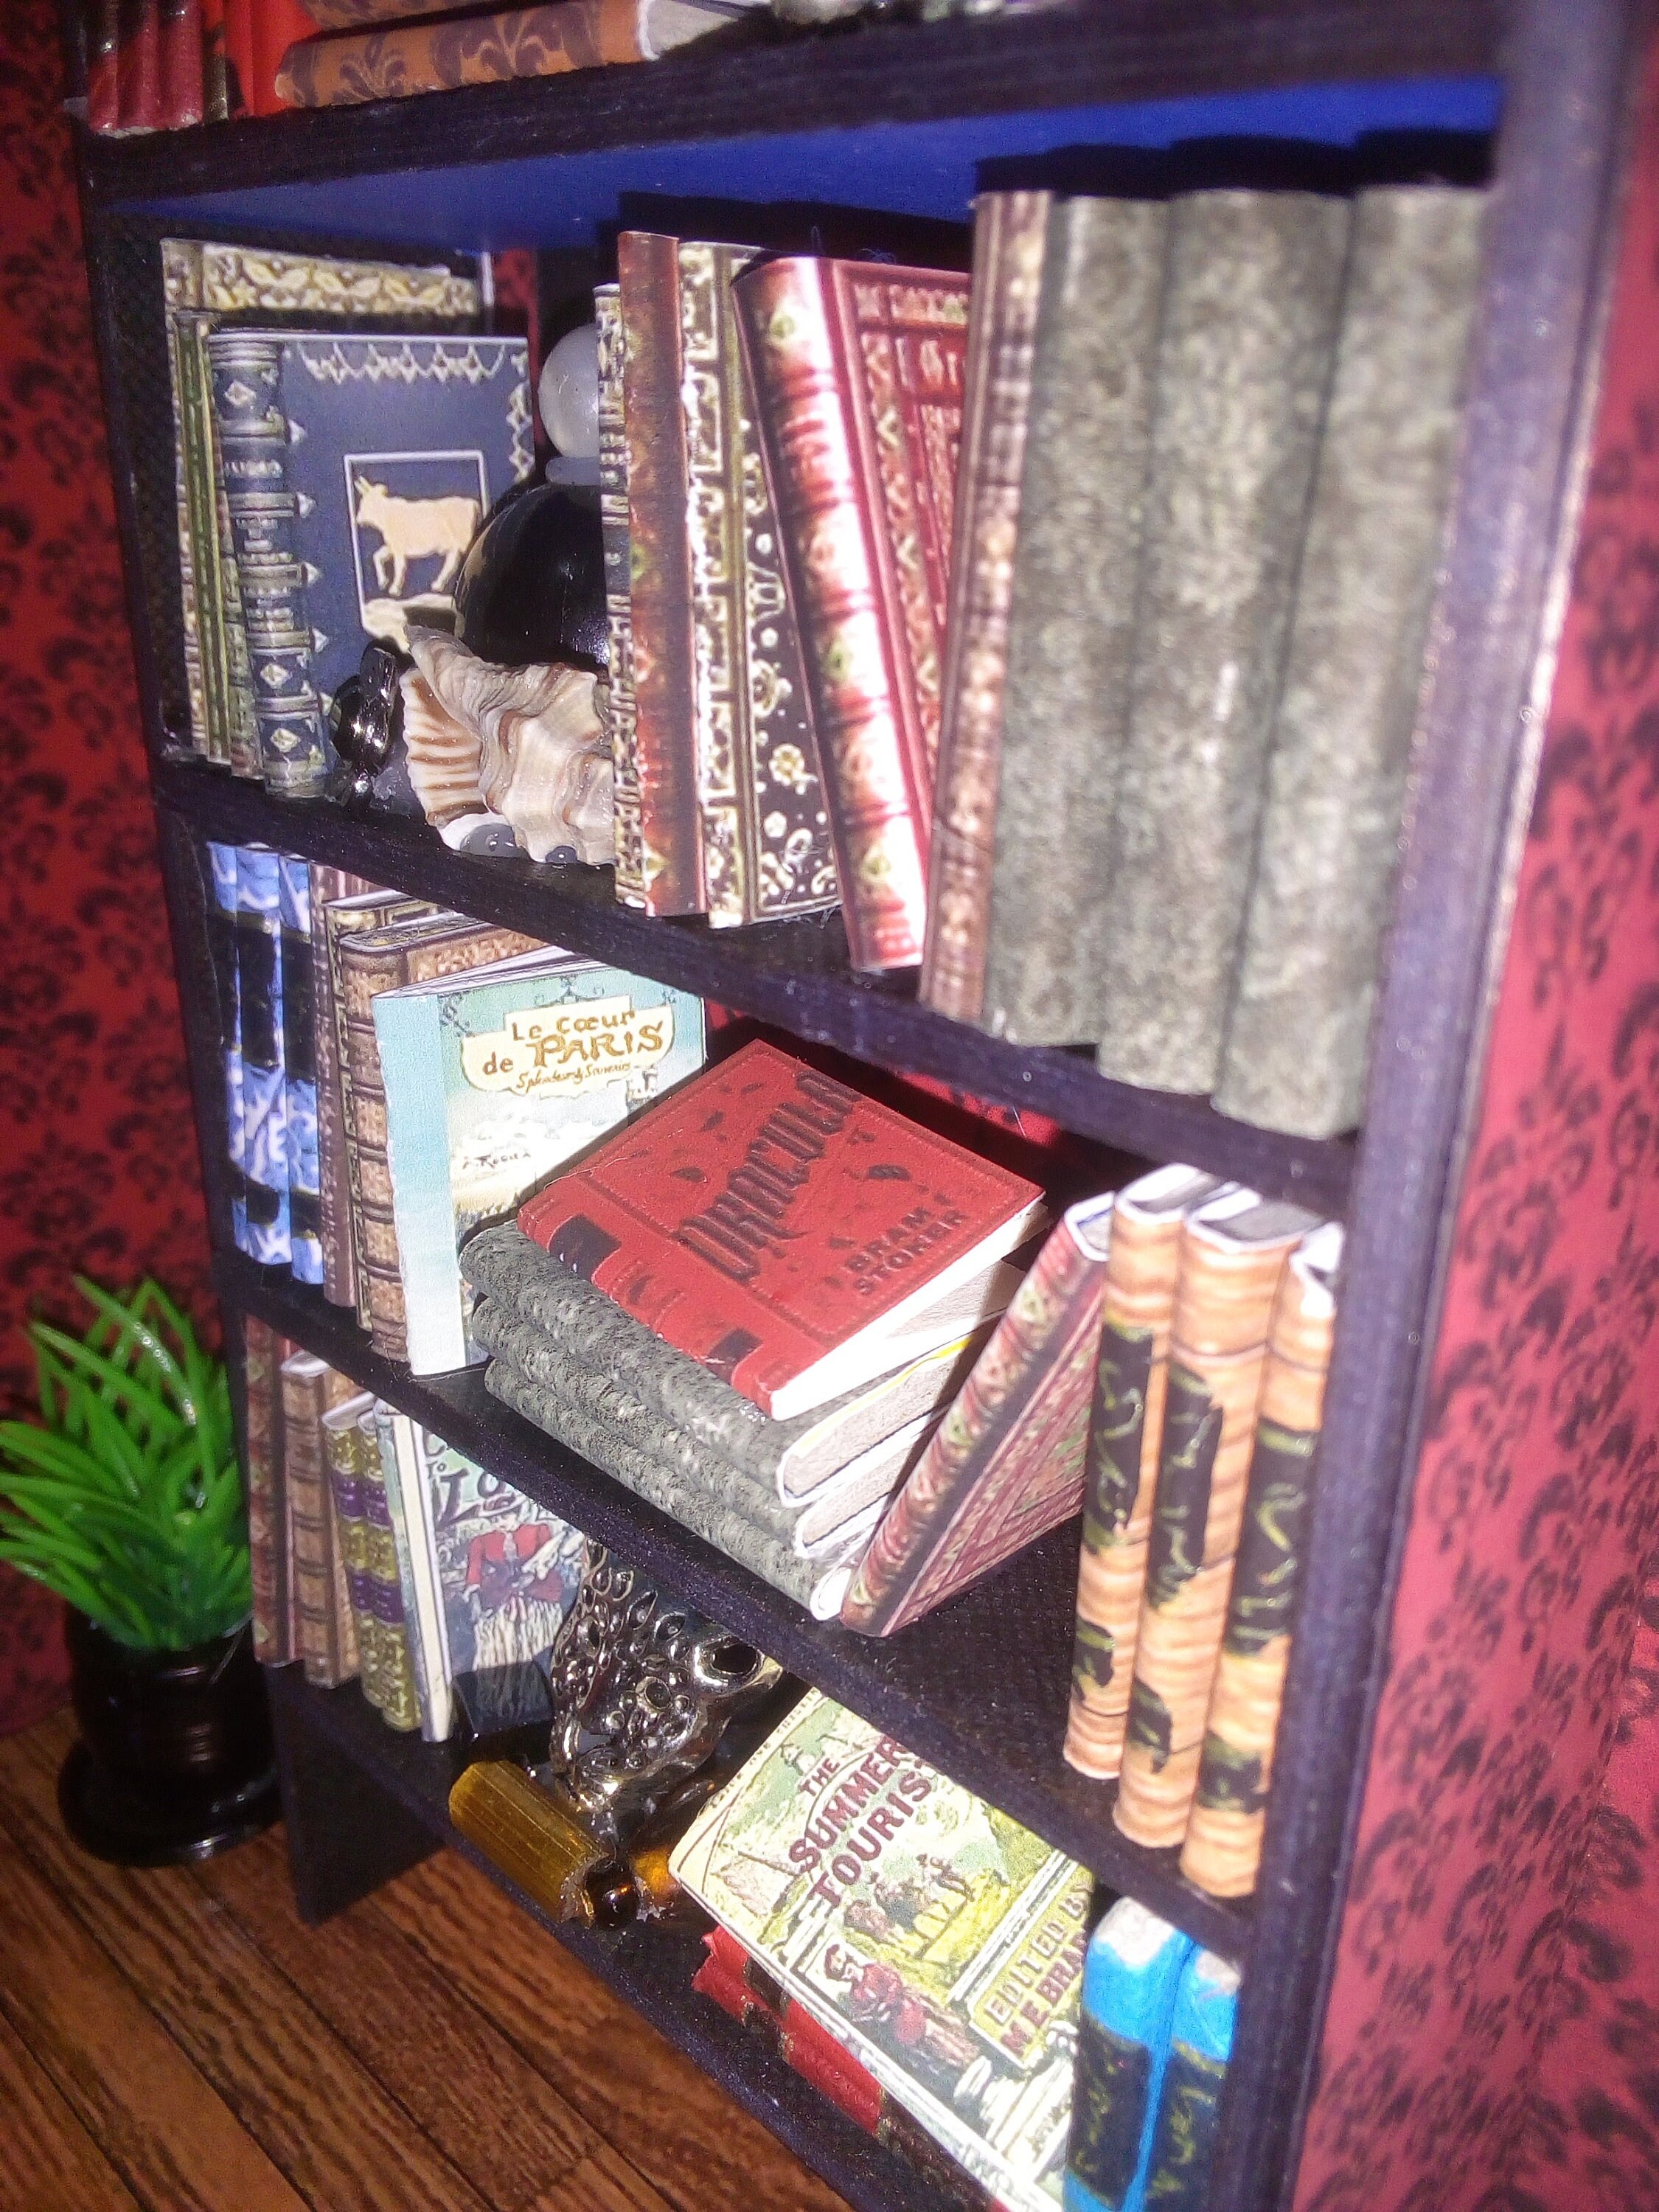 Booknook, Book Nook, Diorama, Miniature Room, Book Lover Gift, Vintage  Style Library, Office, Study, Desk and Chair, Heaps of Books. 